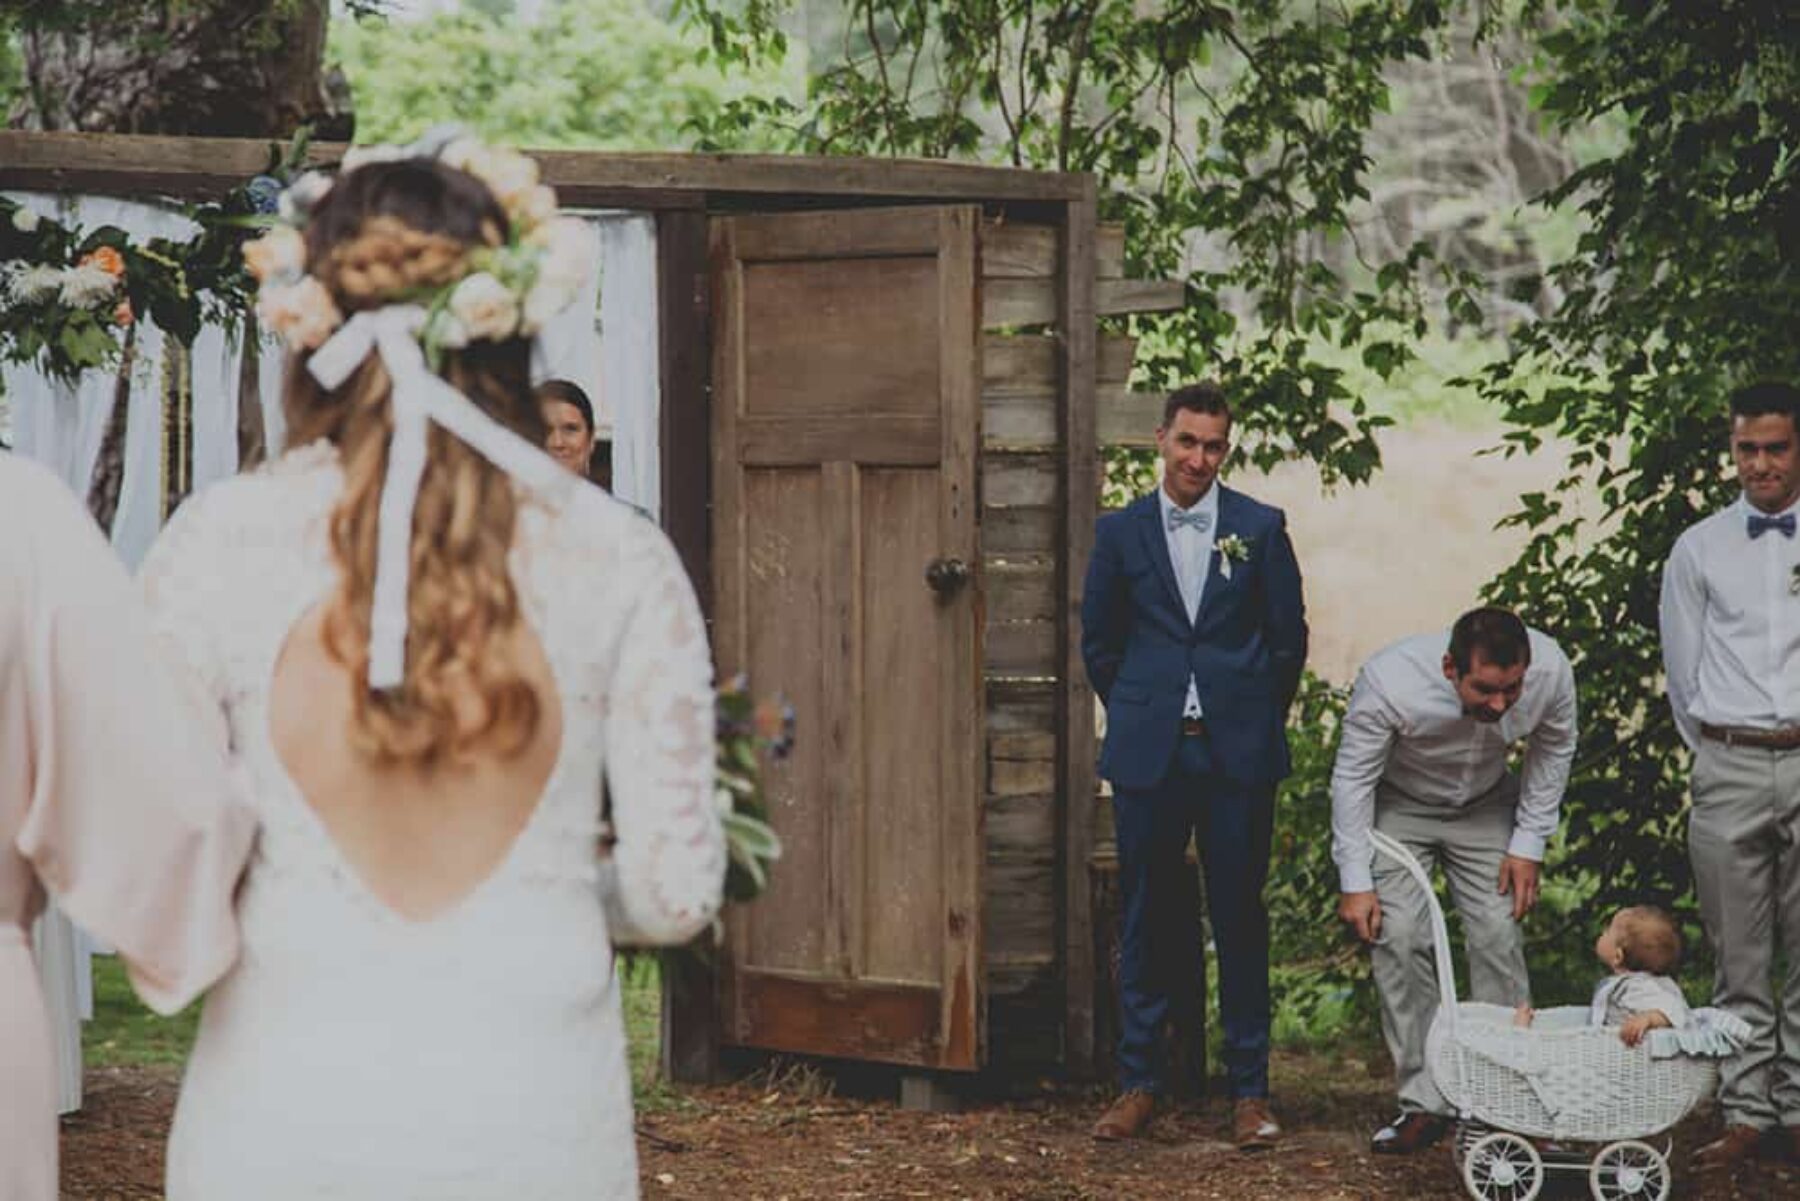 Rustic wedding at New Zealand's Old Forest School - photography by Lucy Rice